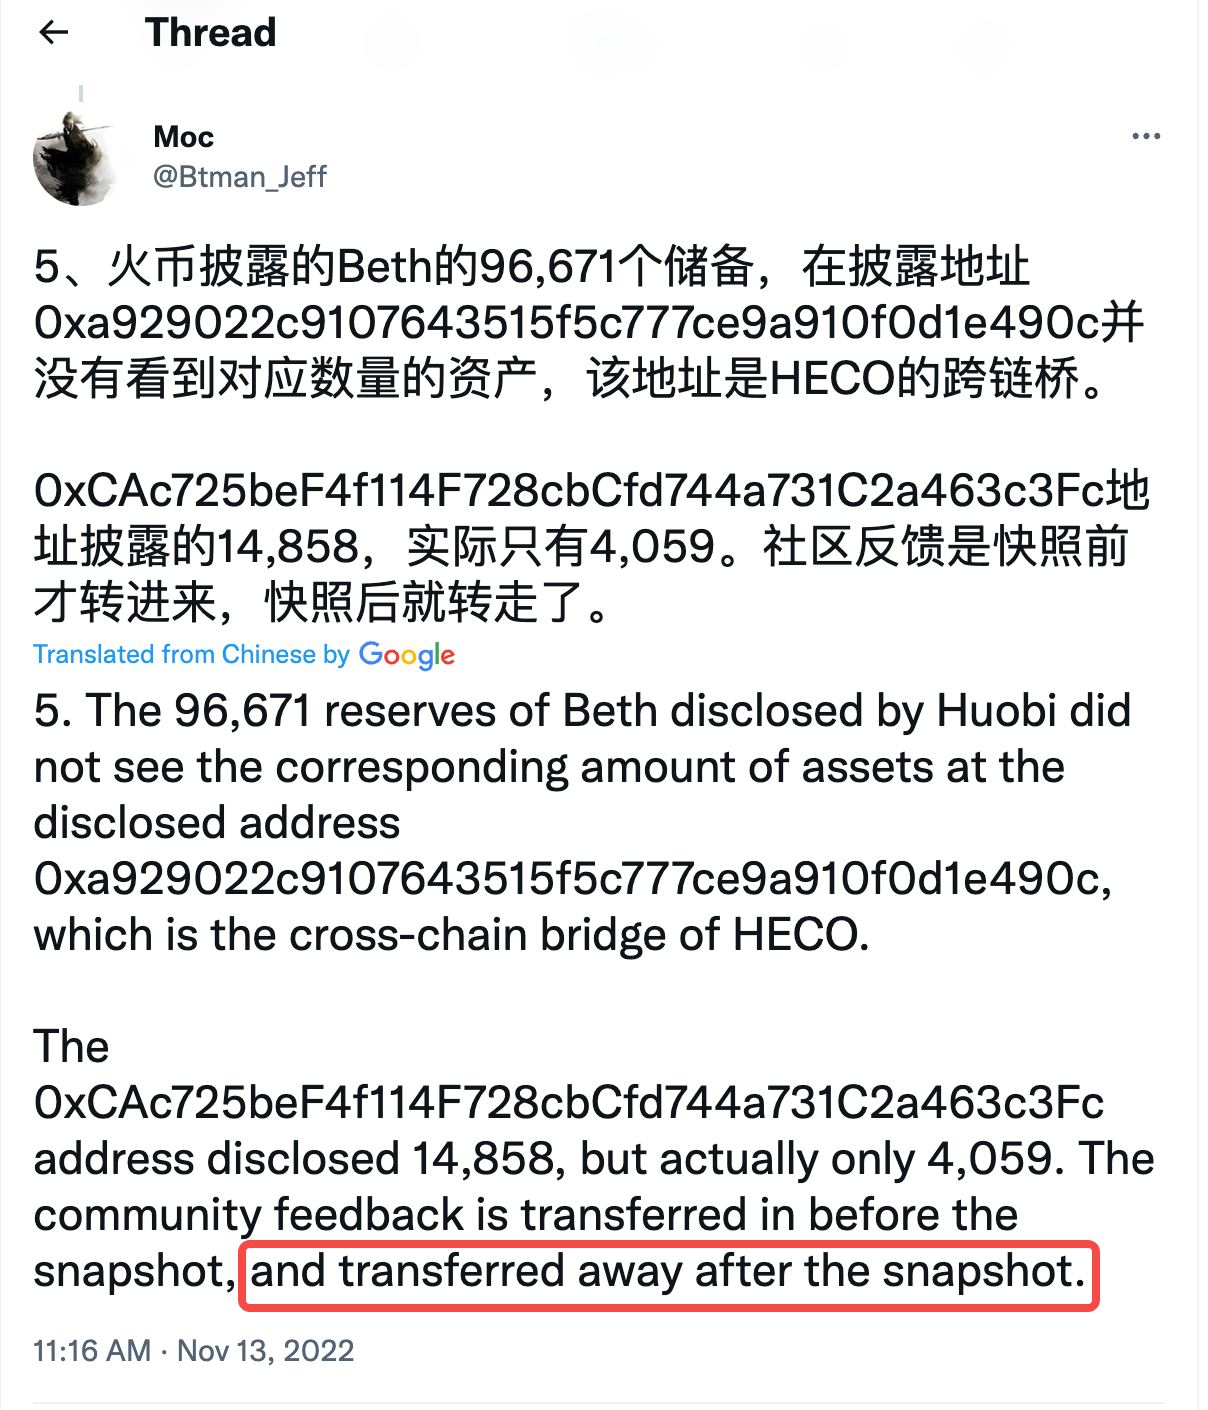 Moc(@Btman_Jeff) questioned whether Huobi temporarily dispatches external funding for asset certification